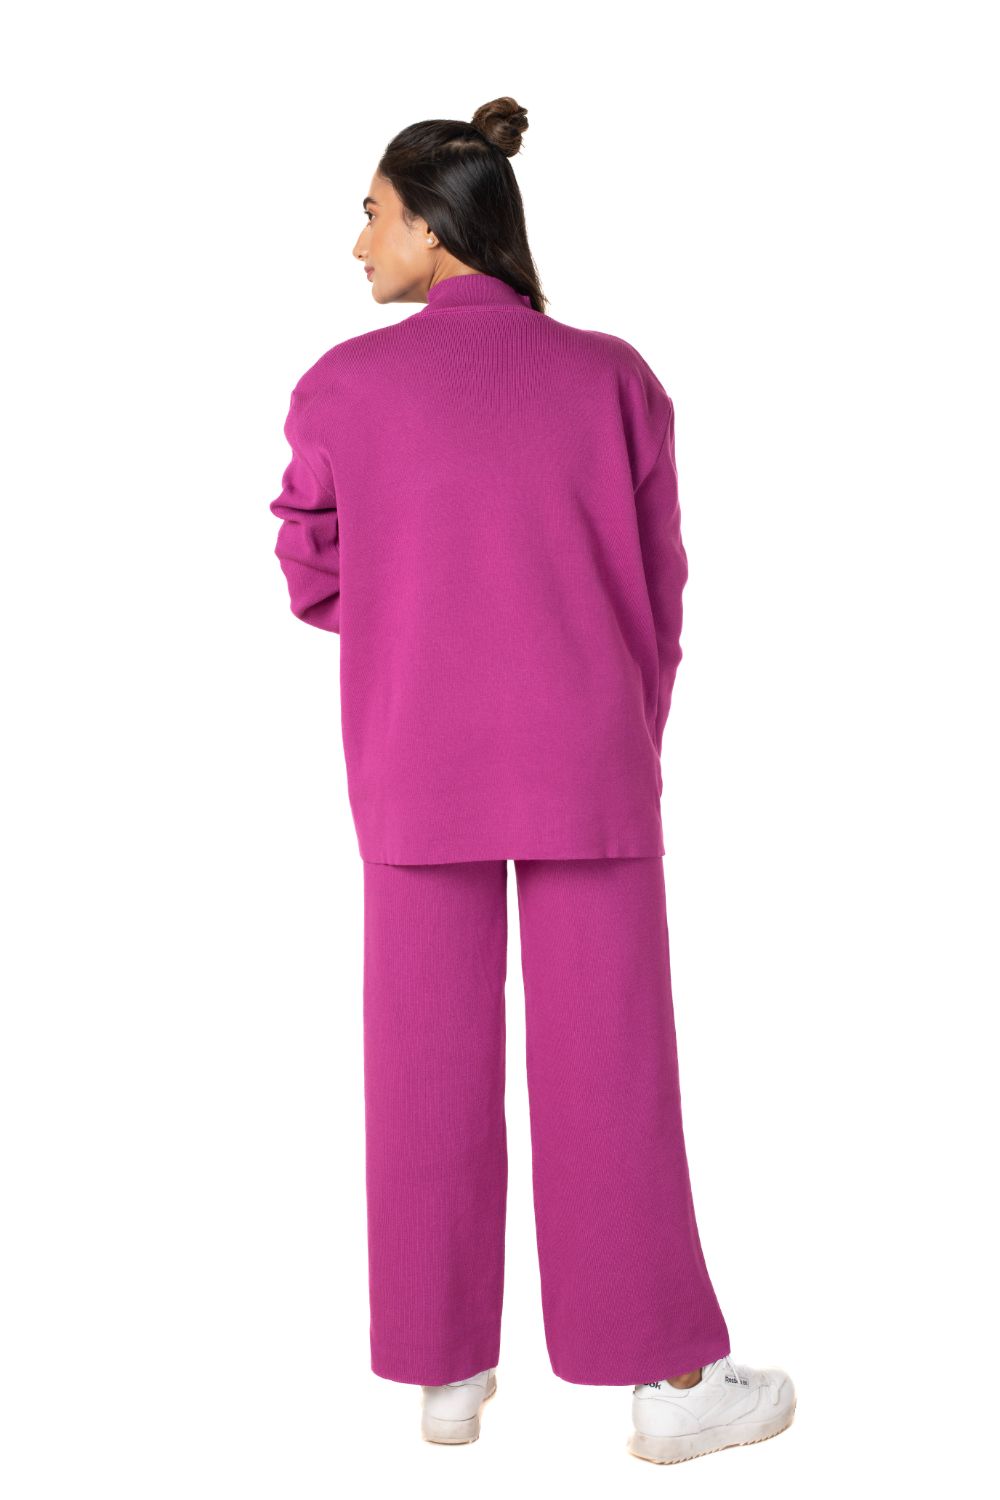 Cosy Airport Ready Coord Set full sleeve deep pink lounge wear featured